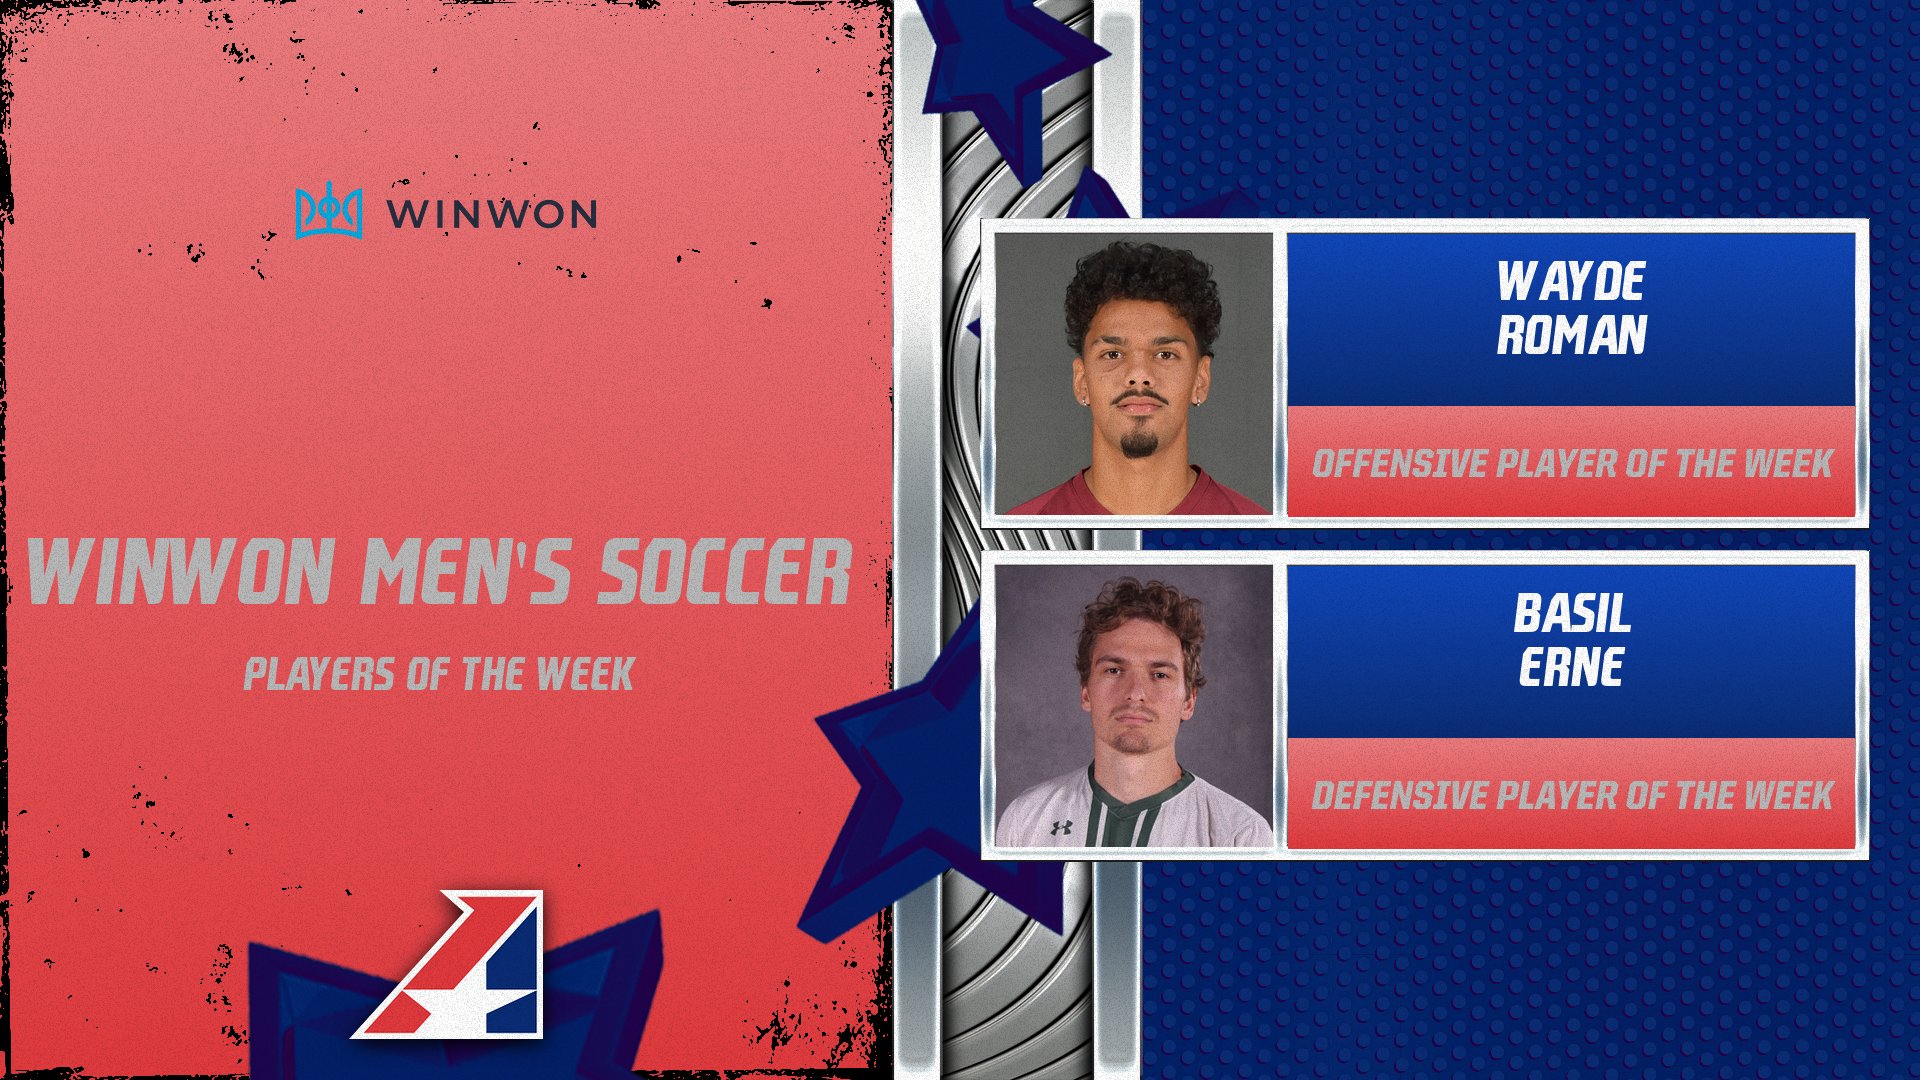 WinWon Men’s Soccer Players of the Week Announced – October 30